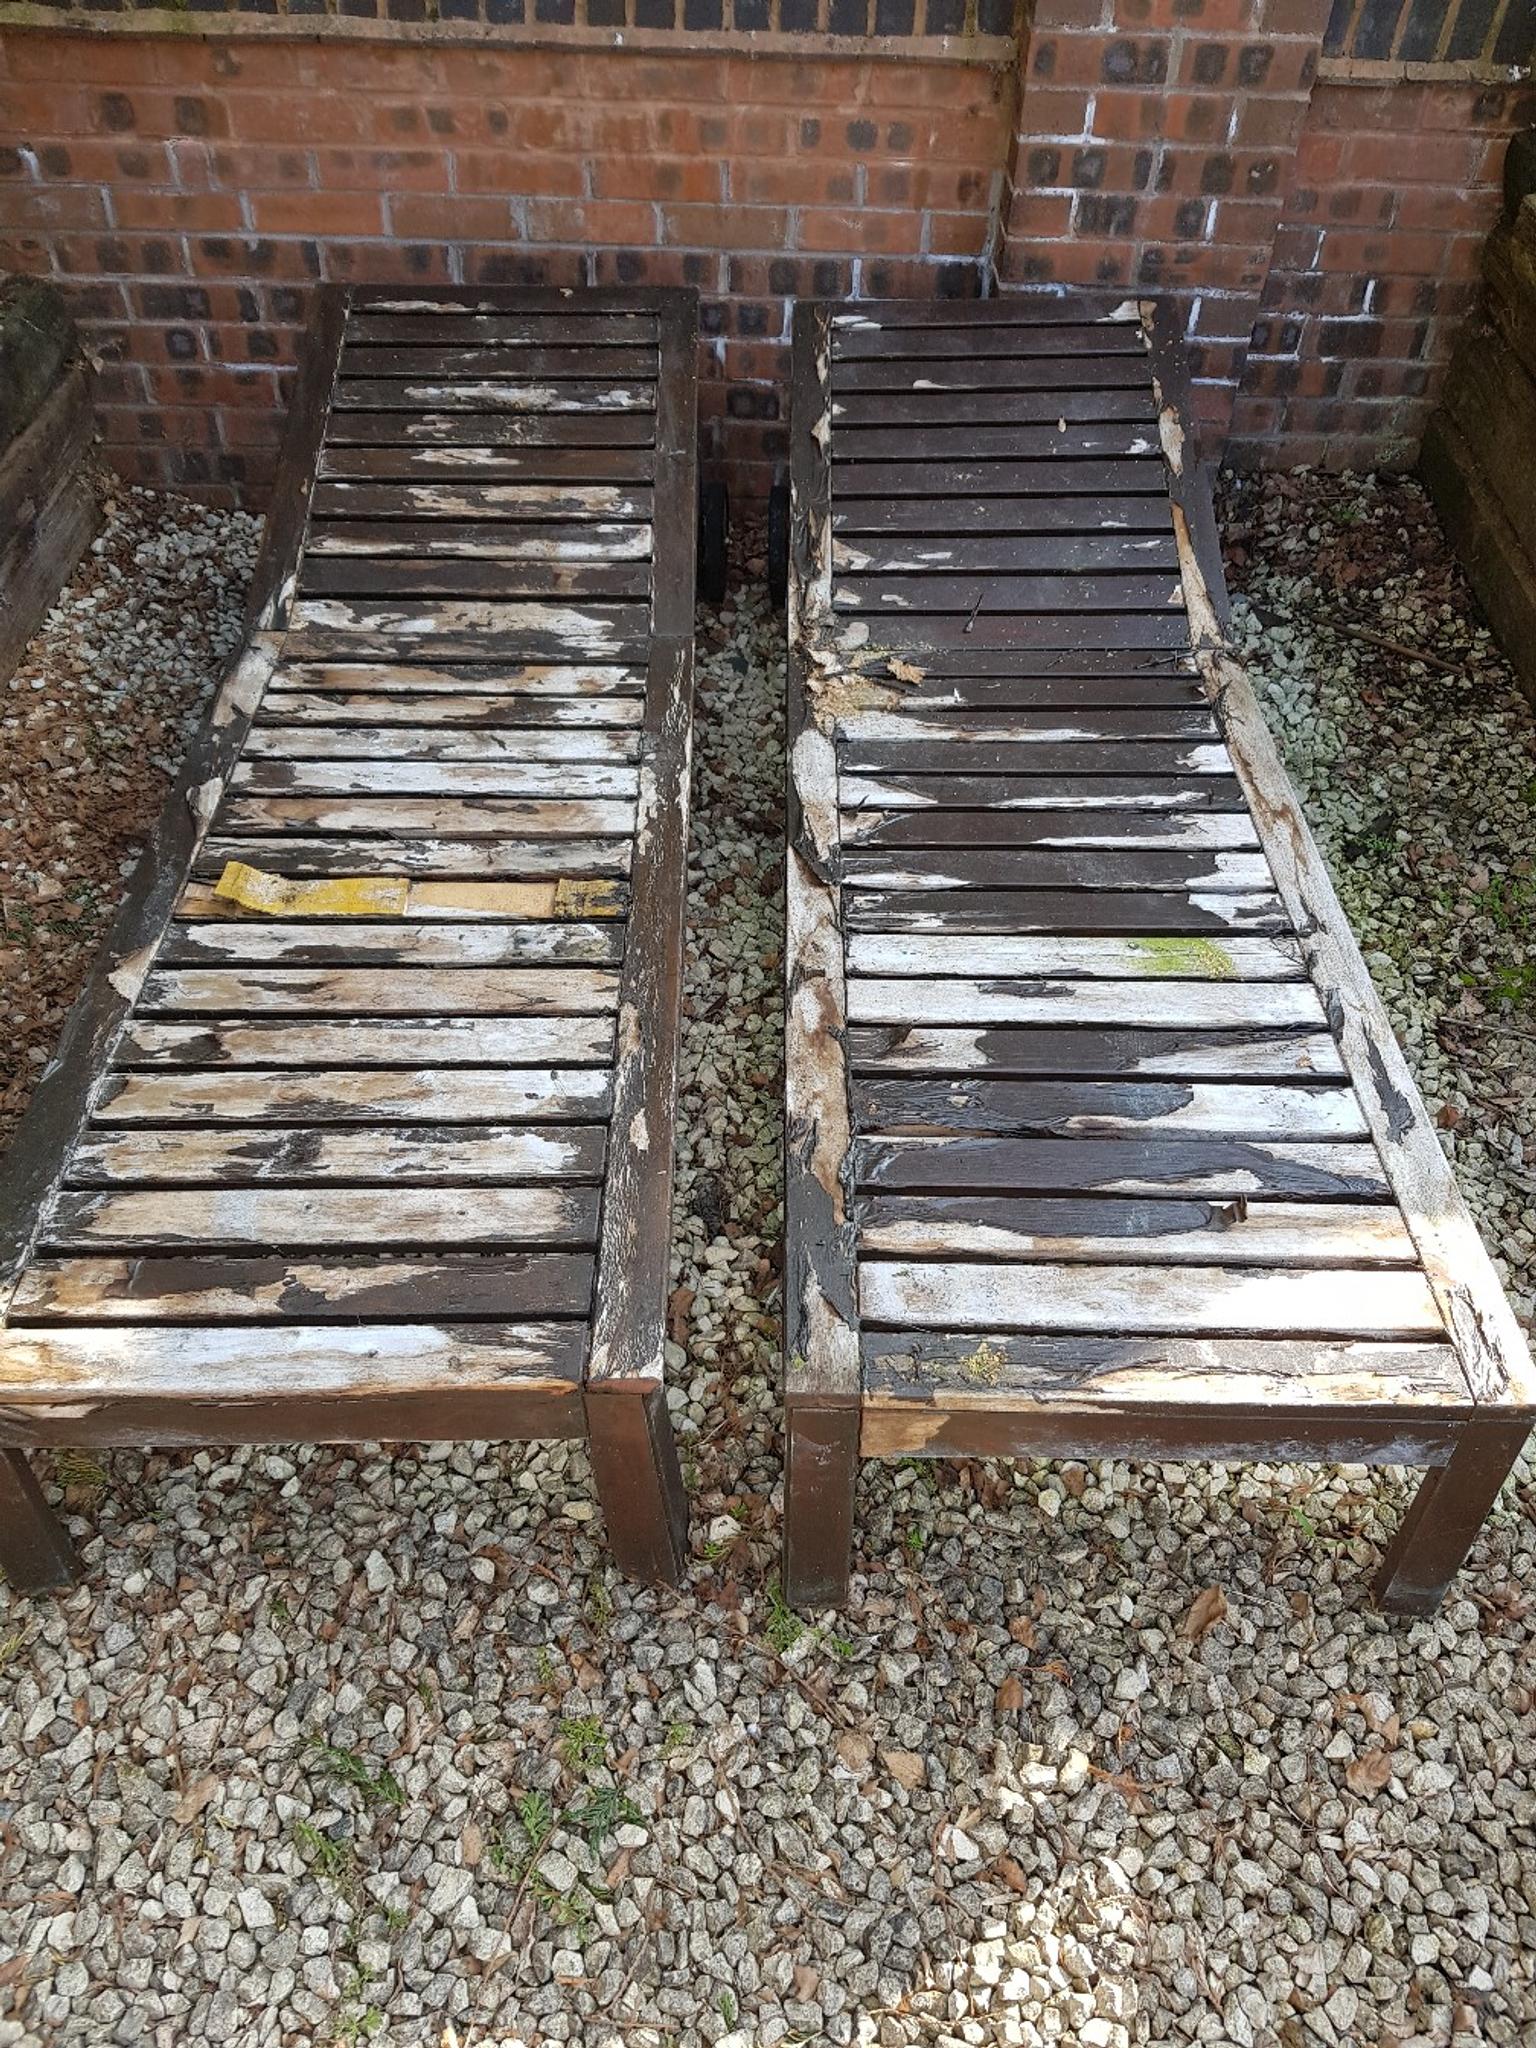 Ikea Hardwood Sunbed Loungers In Wv14 Dudley For 20 00 For Sale